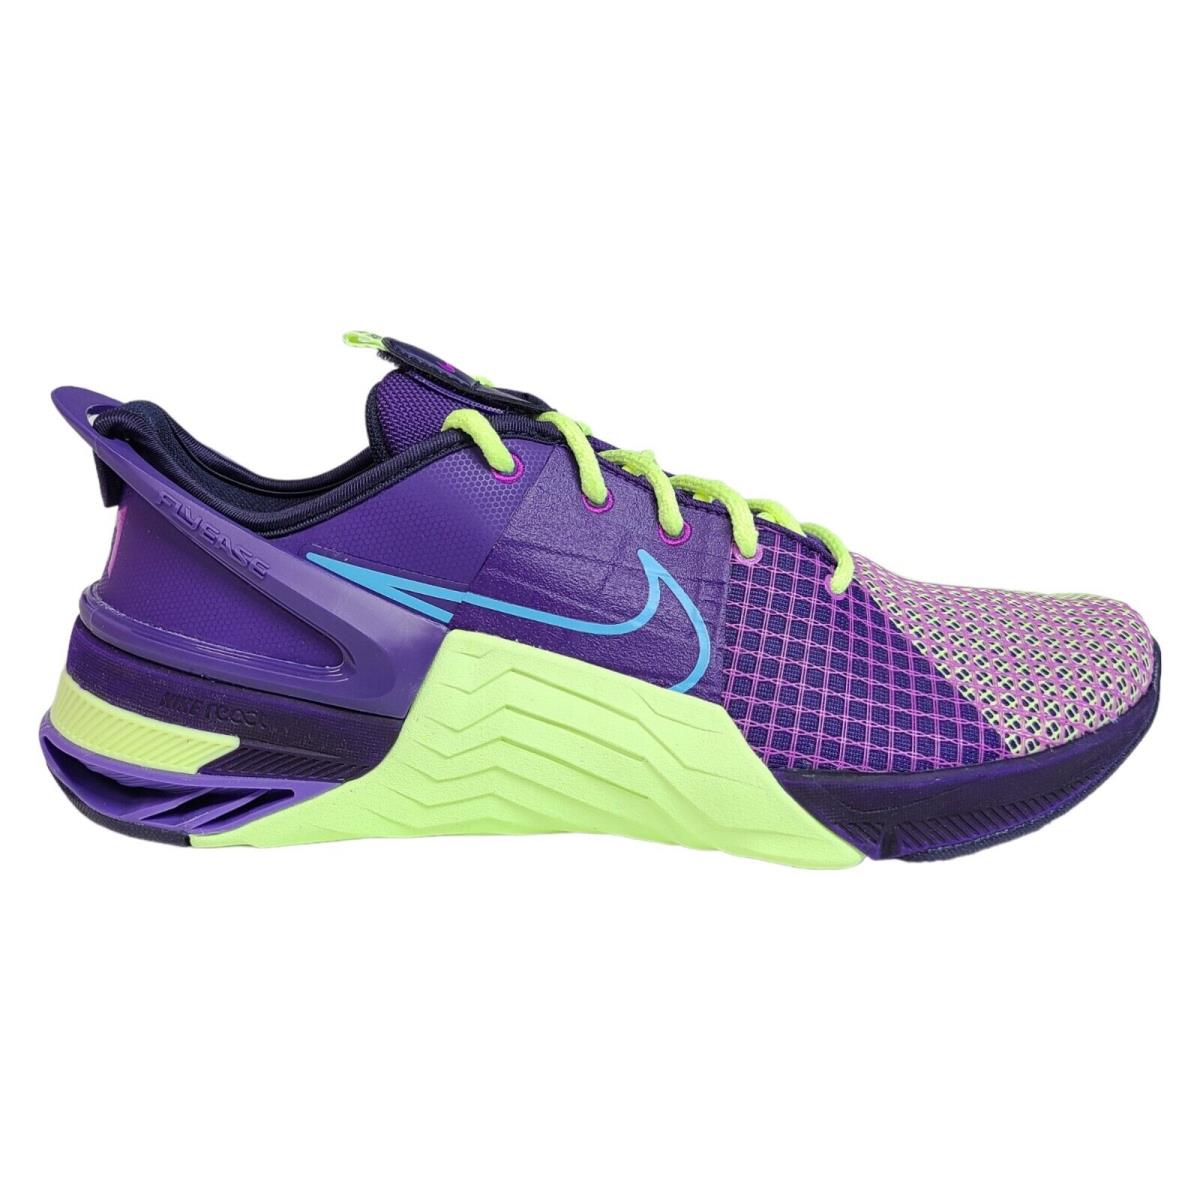 Nike Mens 9 10 Metcon 8 Flyease Amp Training Gym Shoes Purple Green FD0457-500